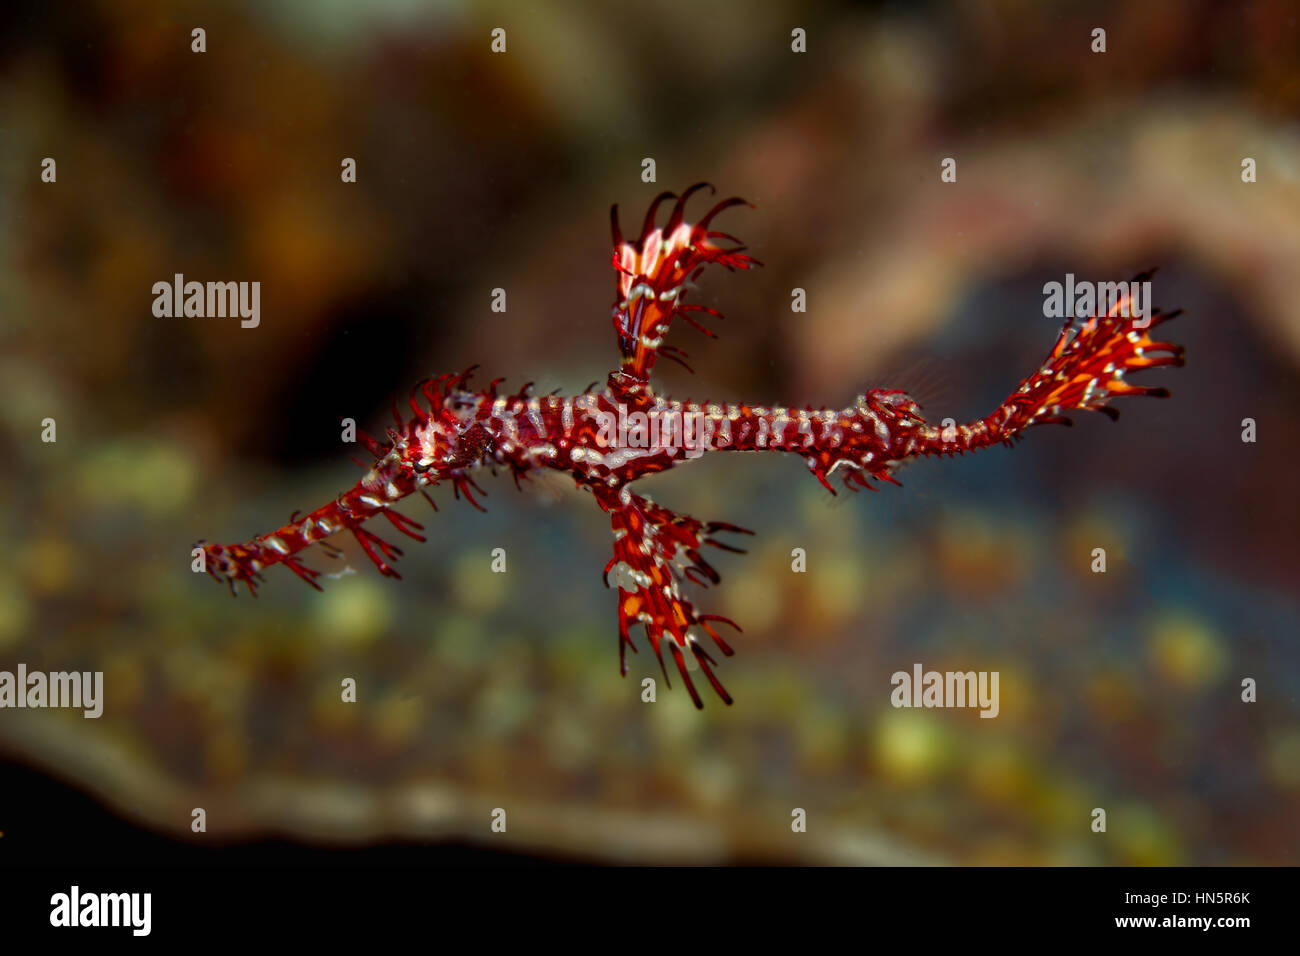 Close-up of an ornate ghost pipefish. Stock Photo